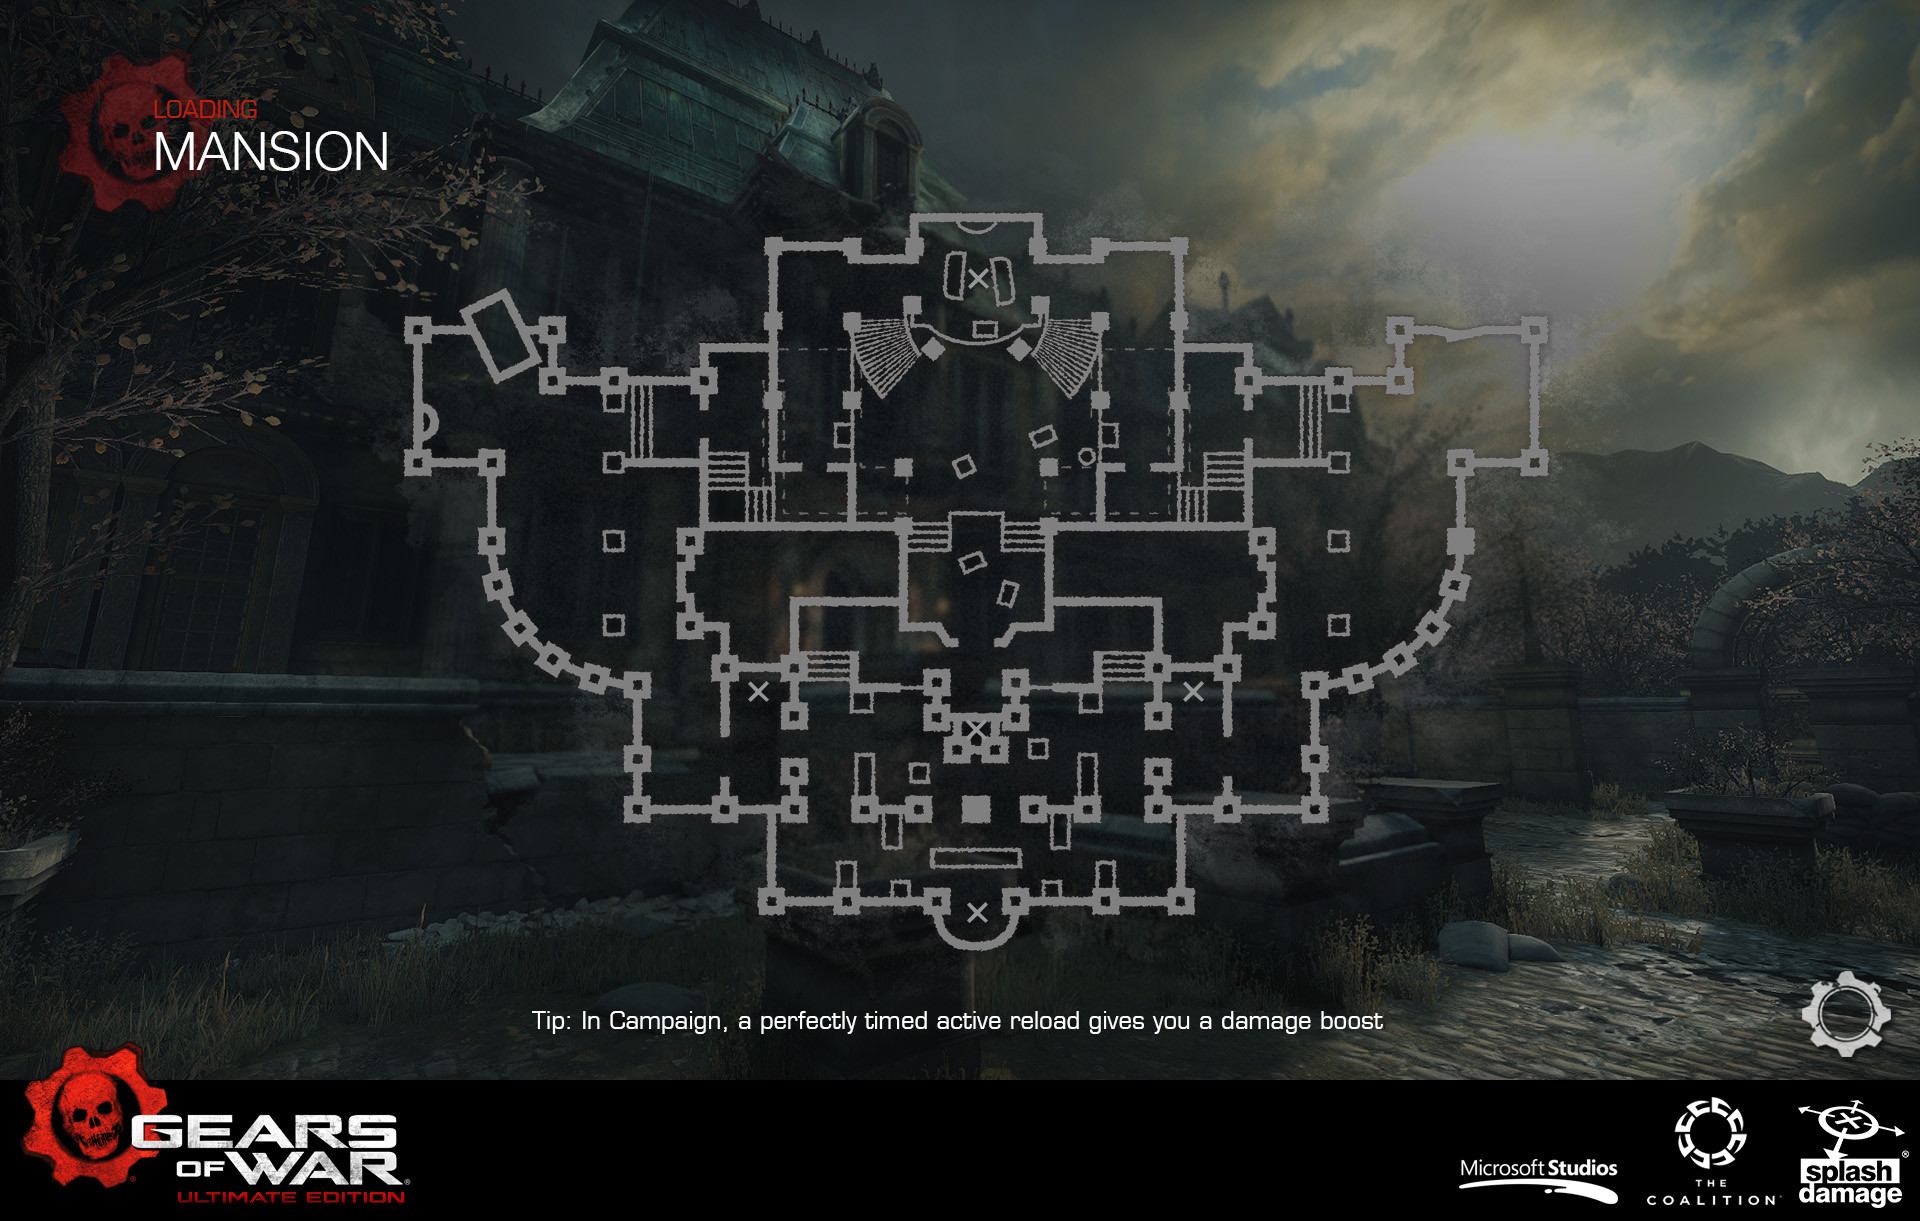 Gears of War Ultimate Edition Multiplayer Maps on Behance